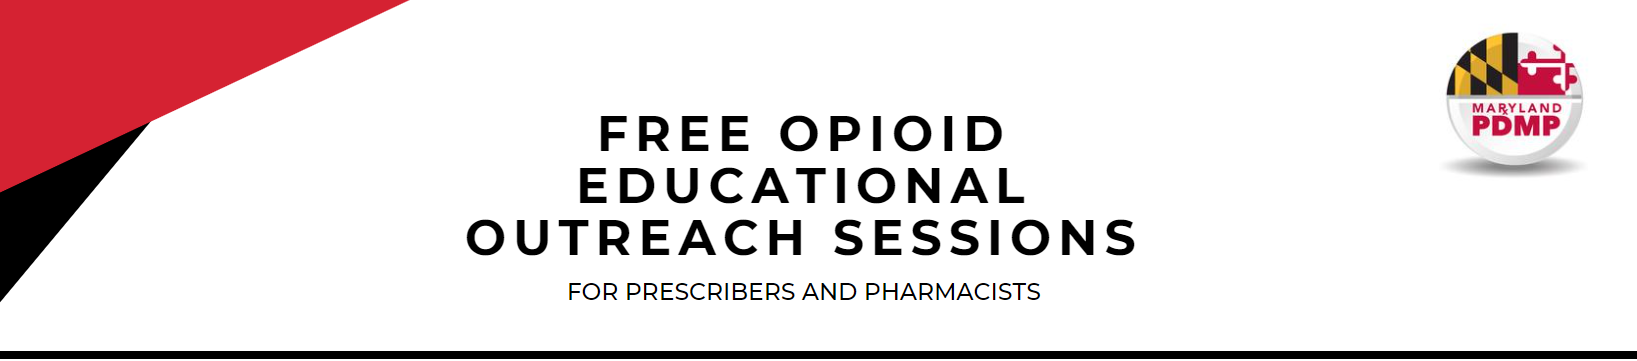 Free Opioid Educational Outreach Sessions for Prescribers and Pharmacists